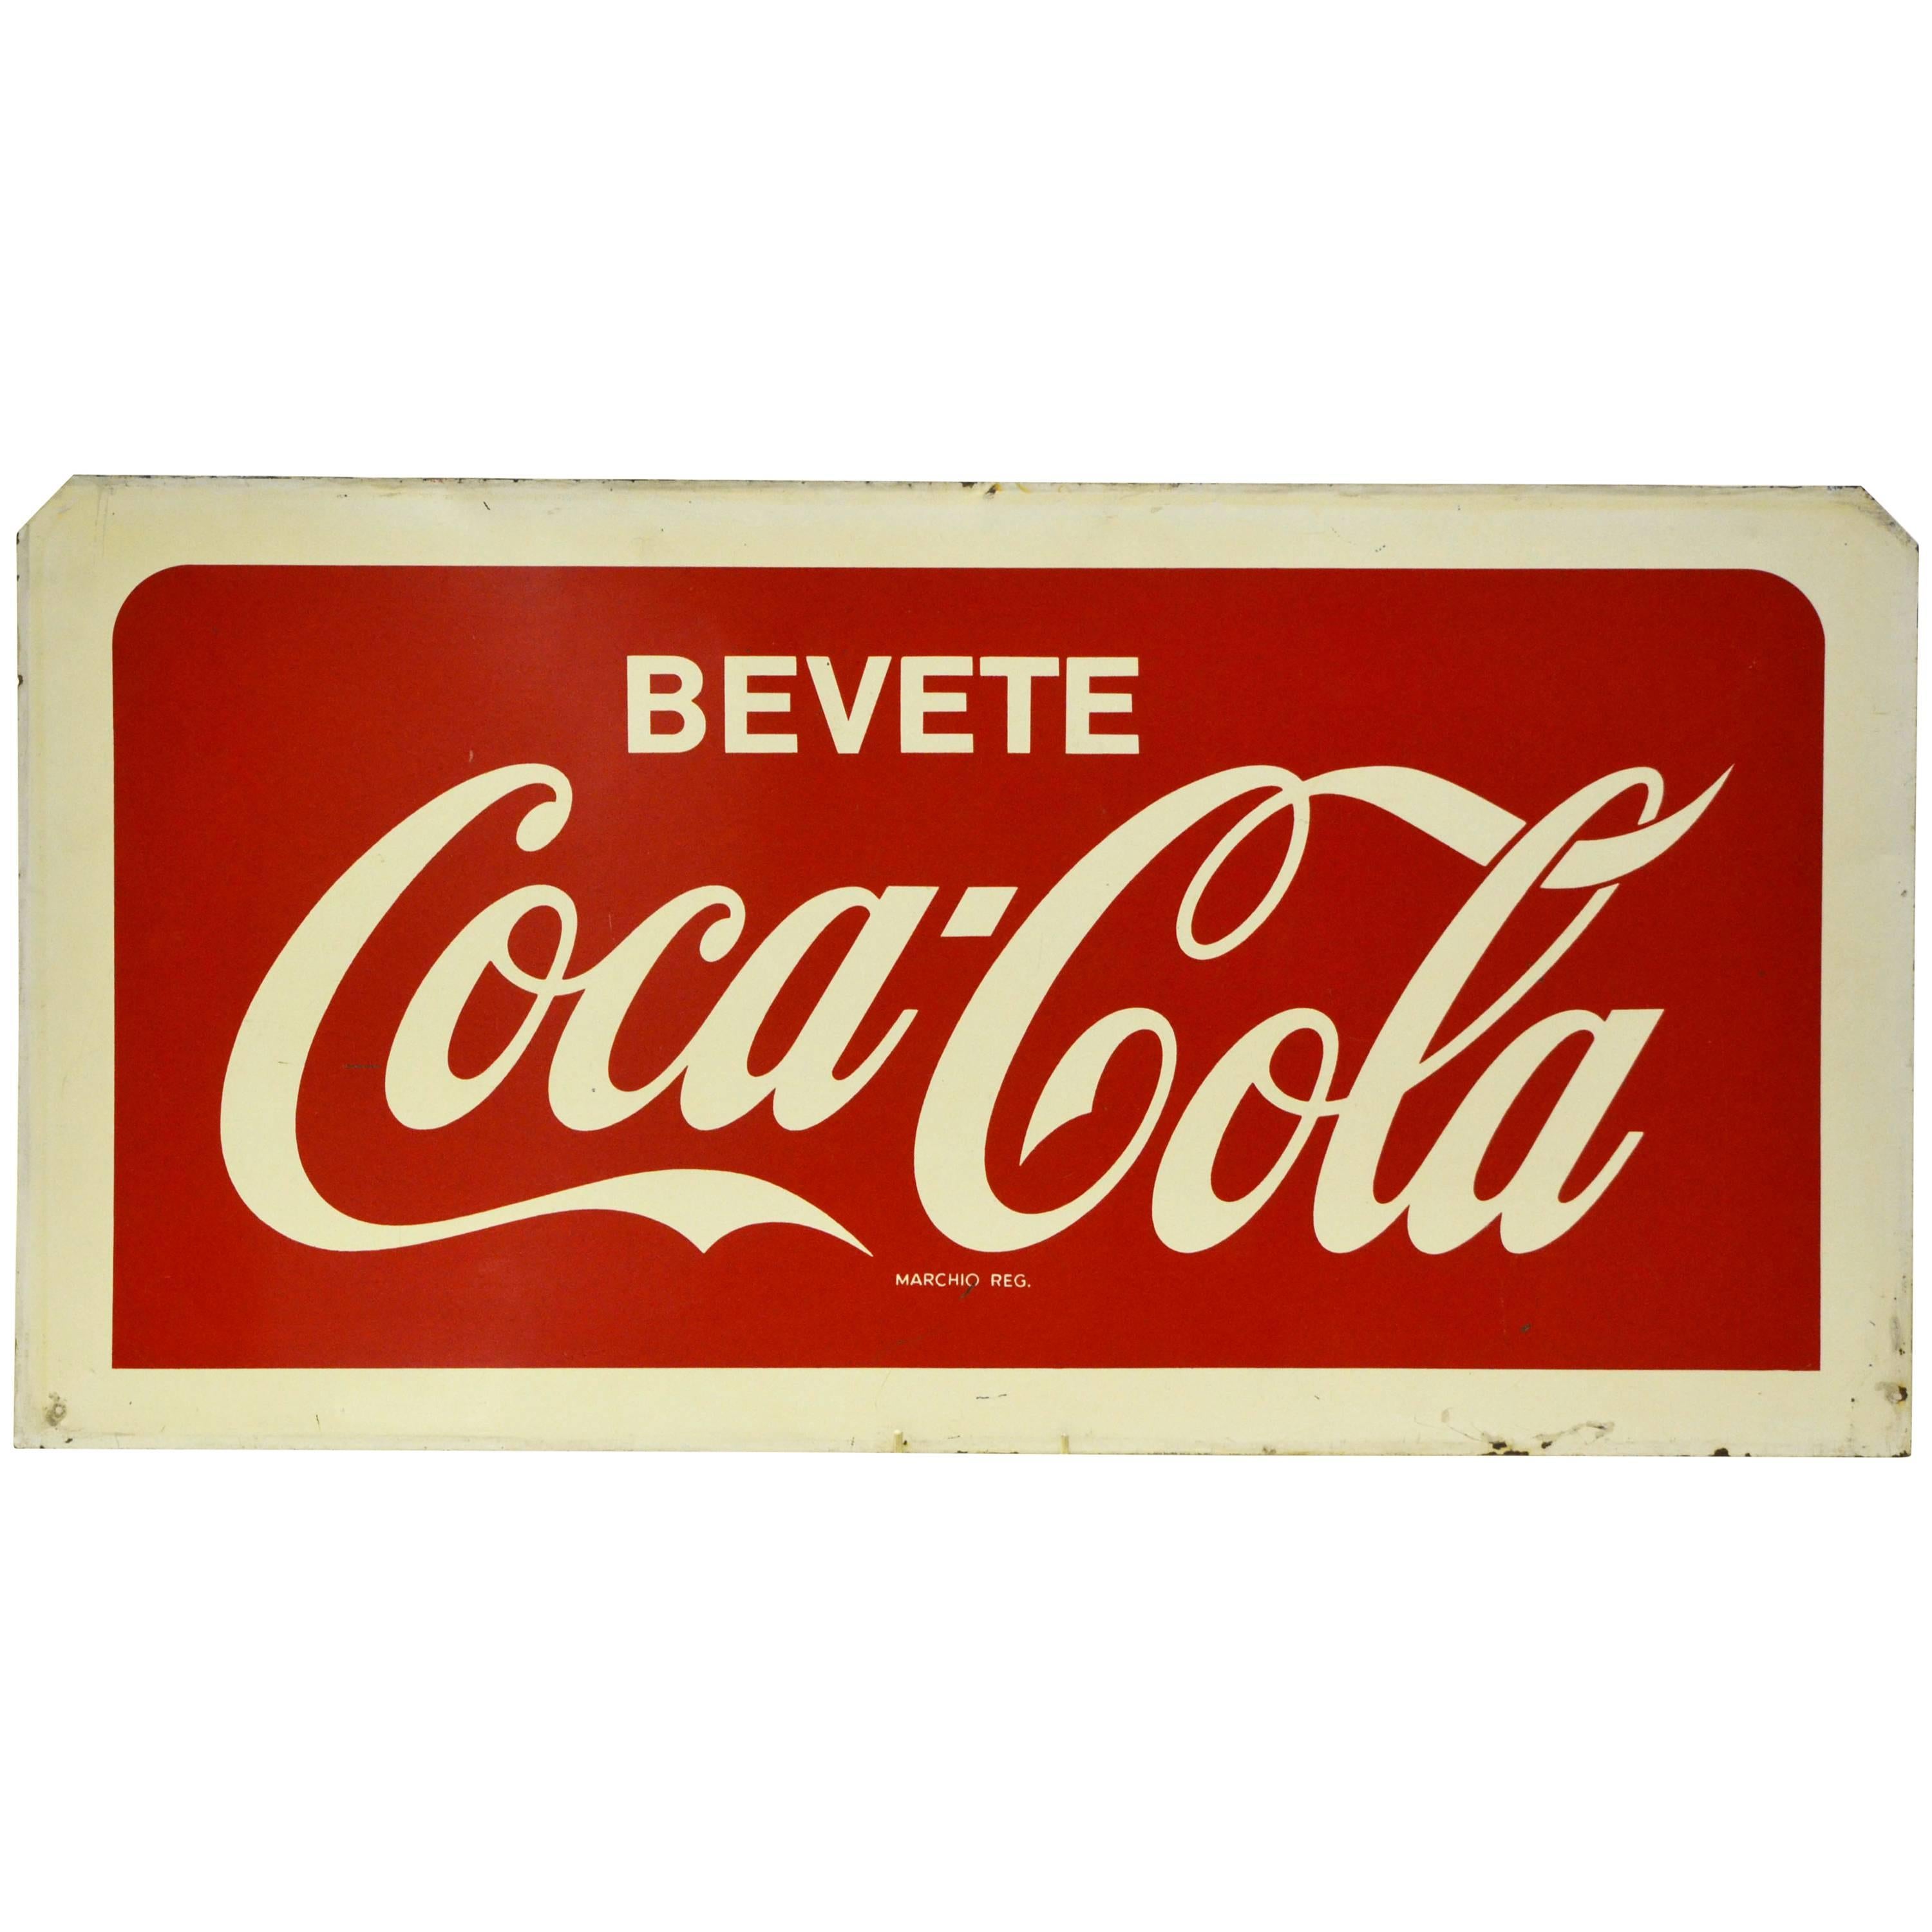 1960s Double-Sided Italian Metal Screen Printed Bevete Coca-Cola Sign For Sale